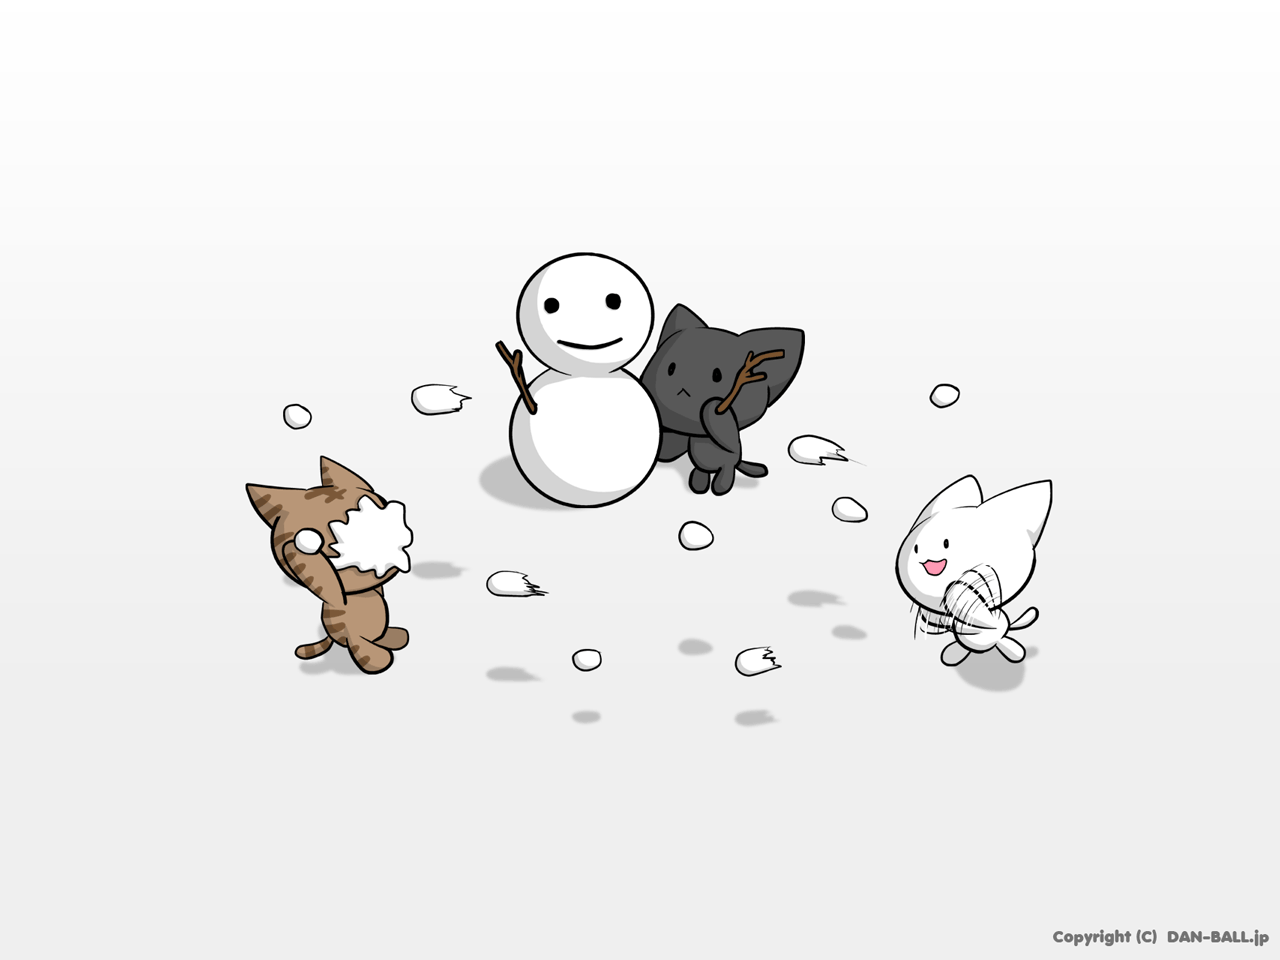 snowball fight clipart black and white school